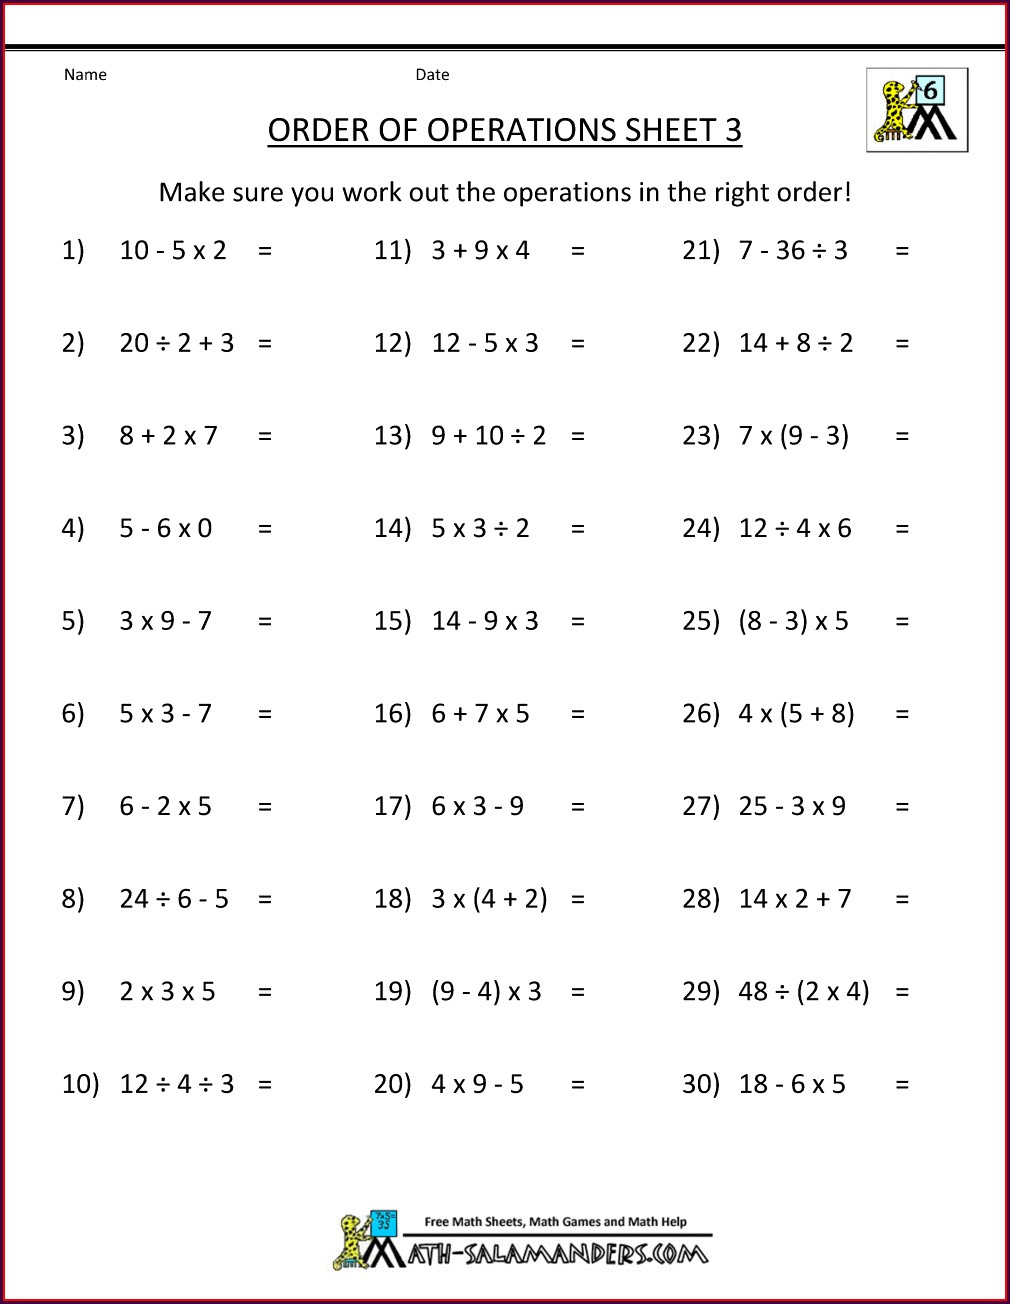 Order Of Operations And Evaluating Expressions Worksheet Pdf Worksheet 